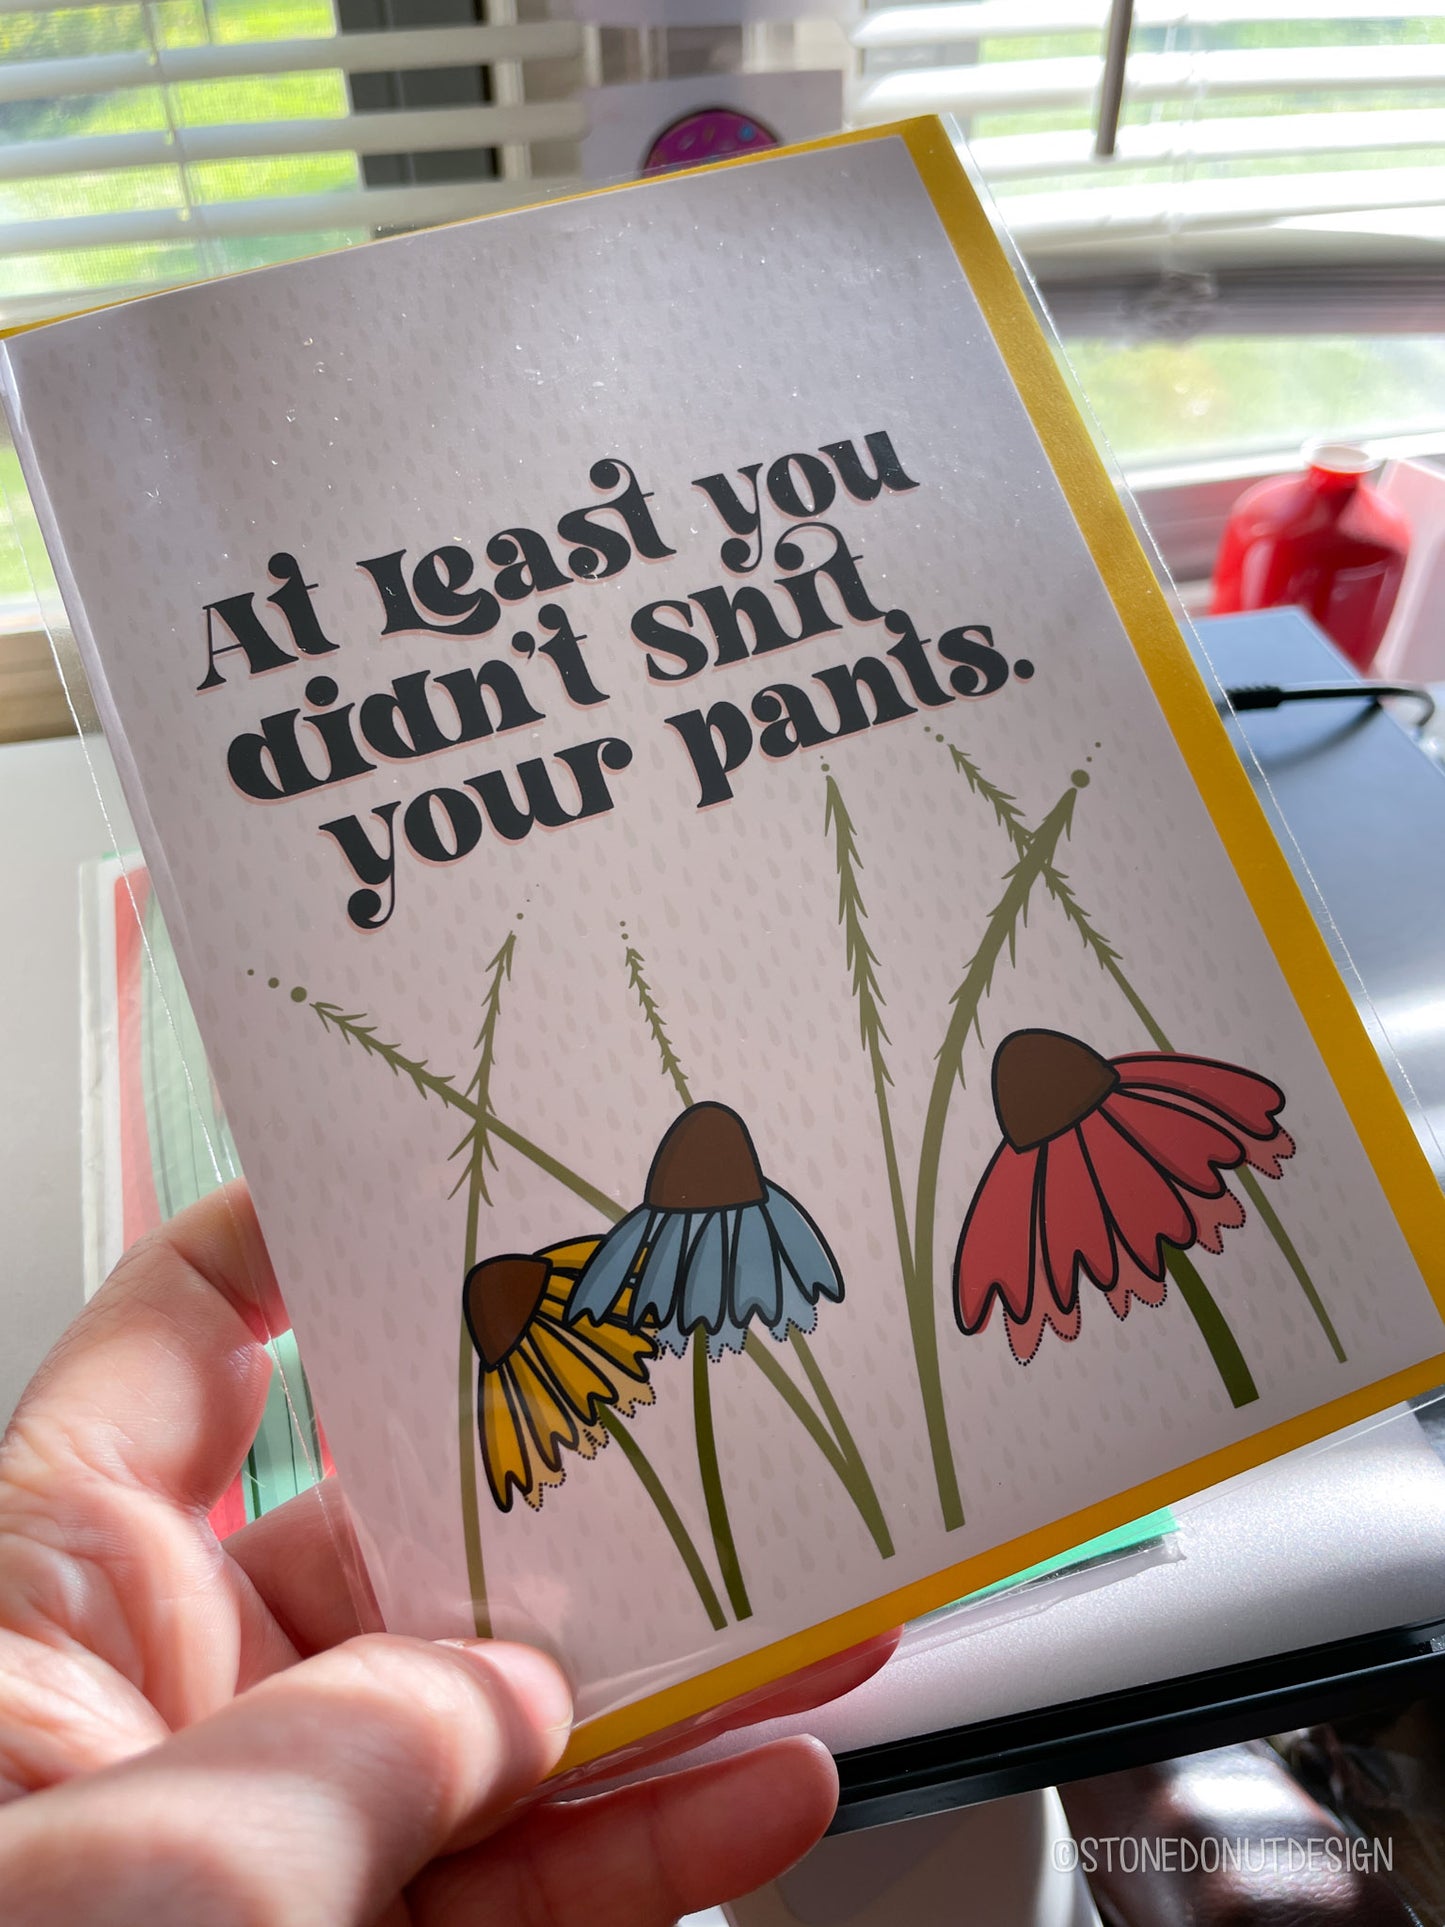 Didn't Shit Your Pants